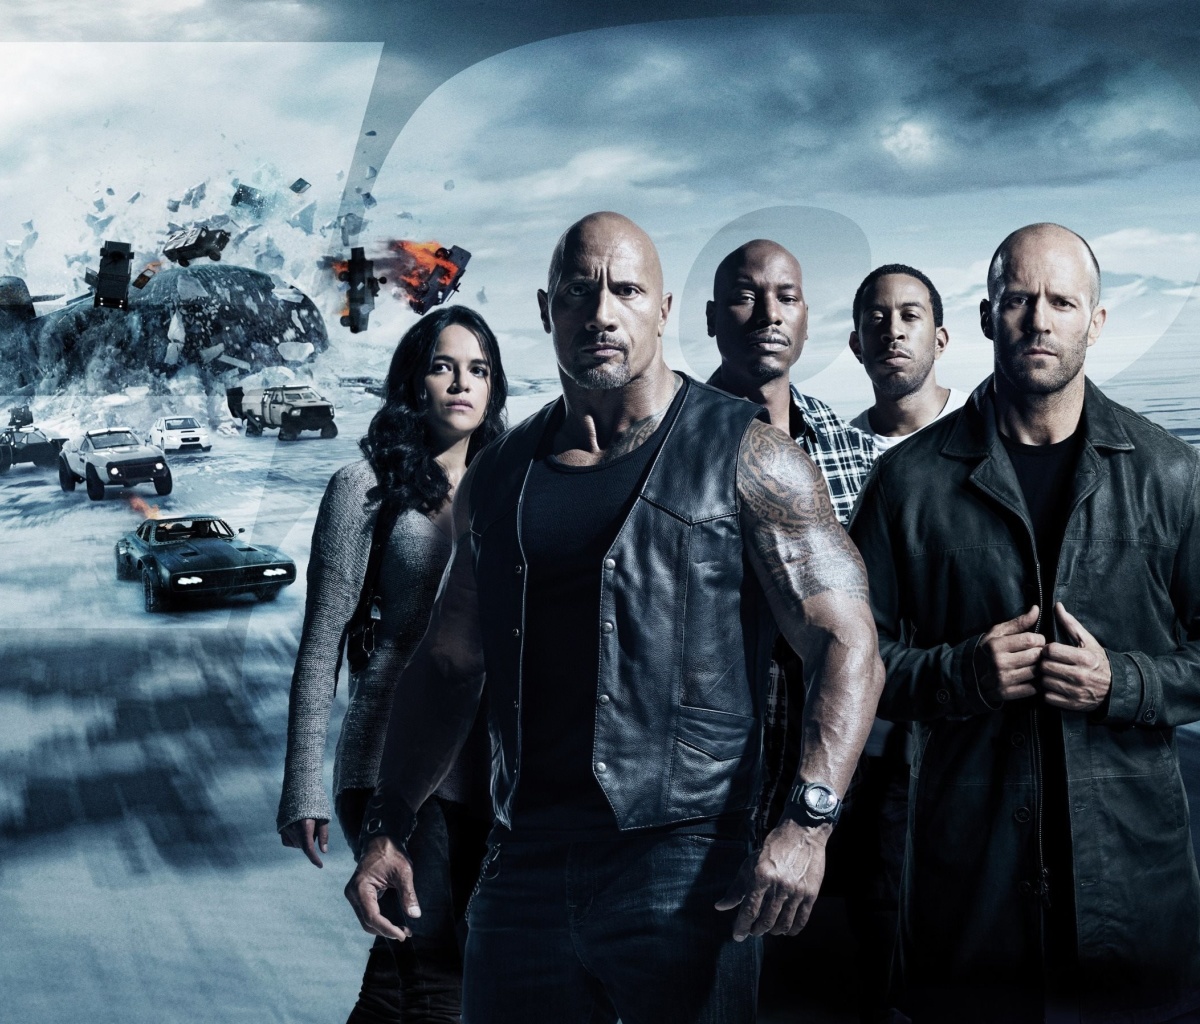 Sfondi The Fate of the Furious with Vin Diesel, Dwayne Johnson, Charlize Theron 1200x1024